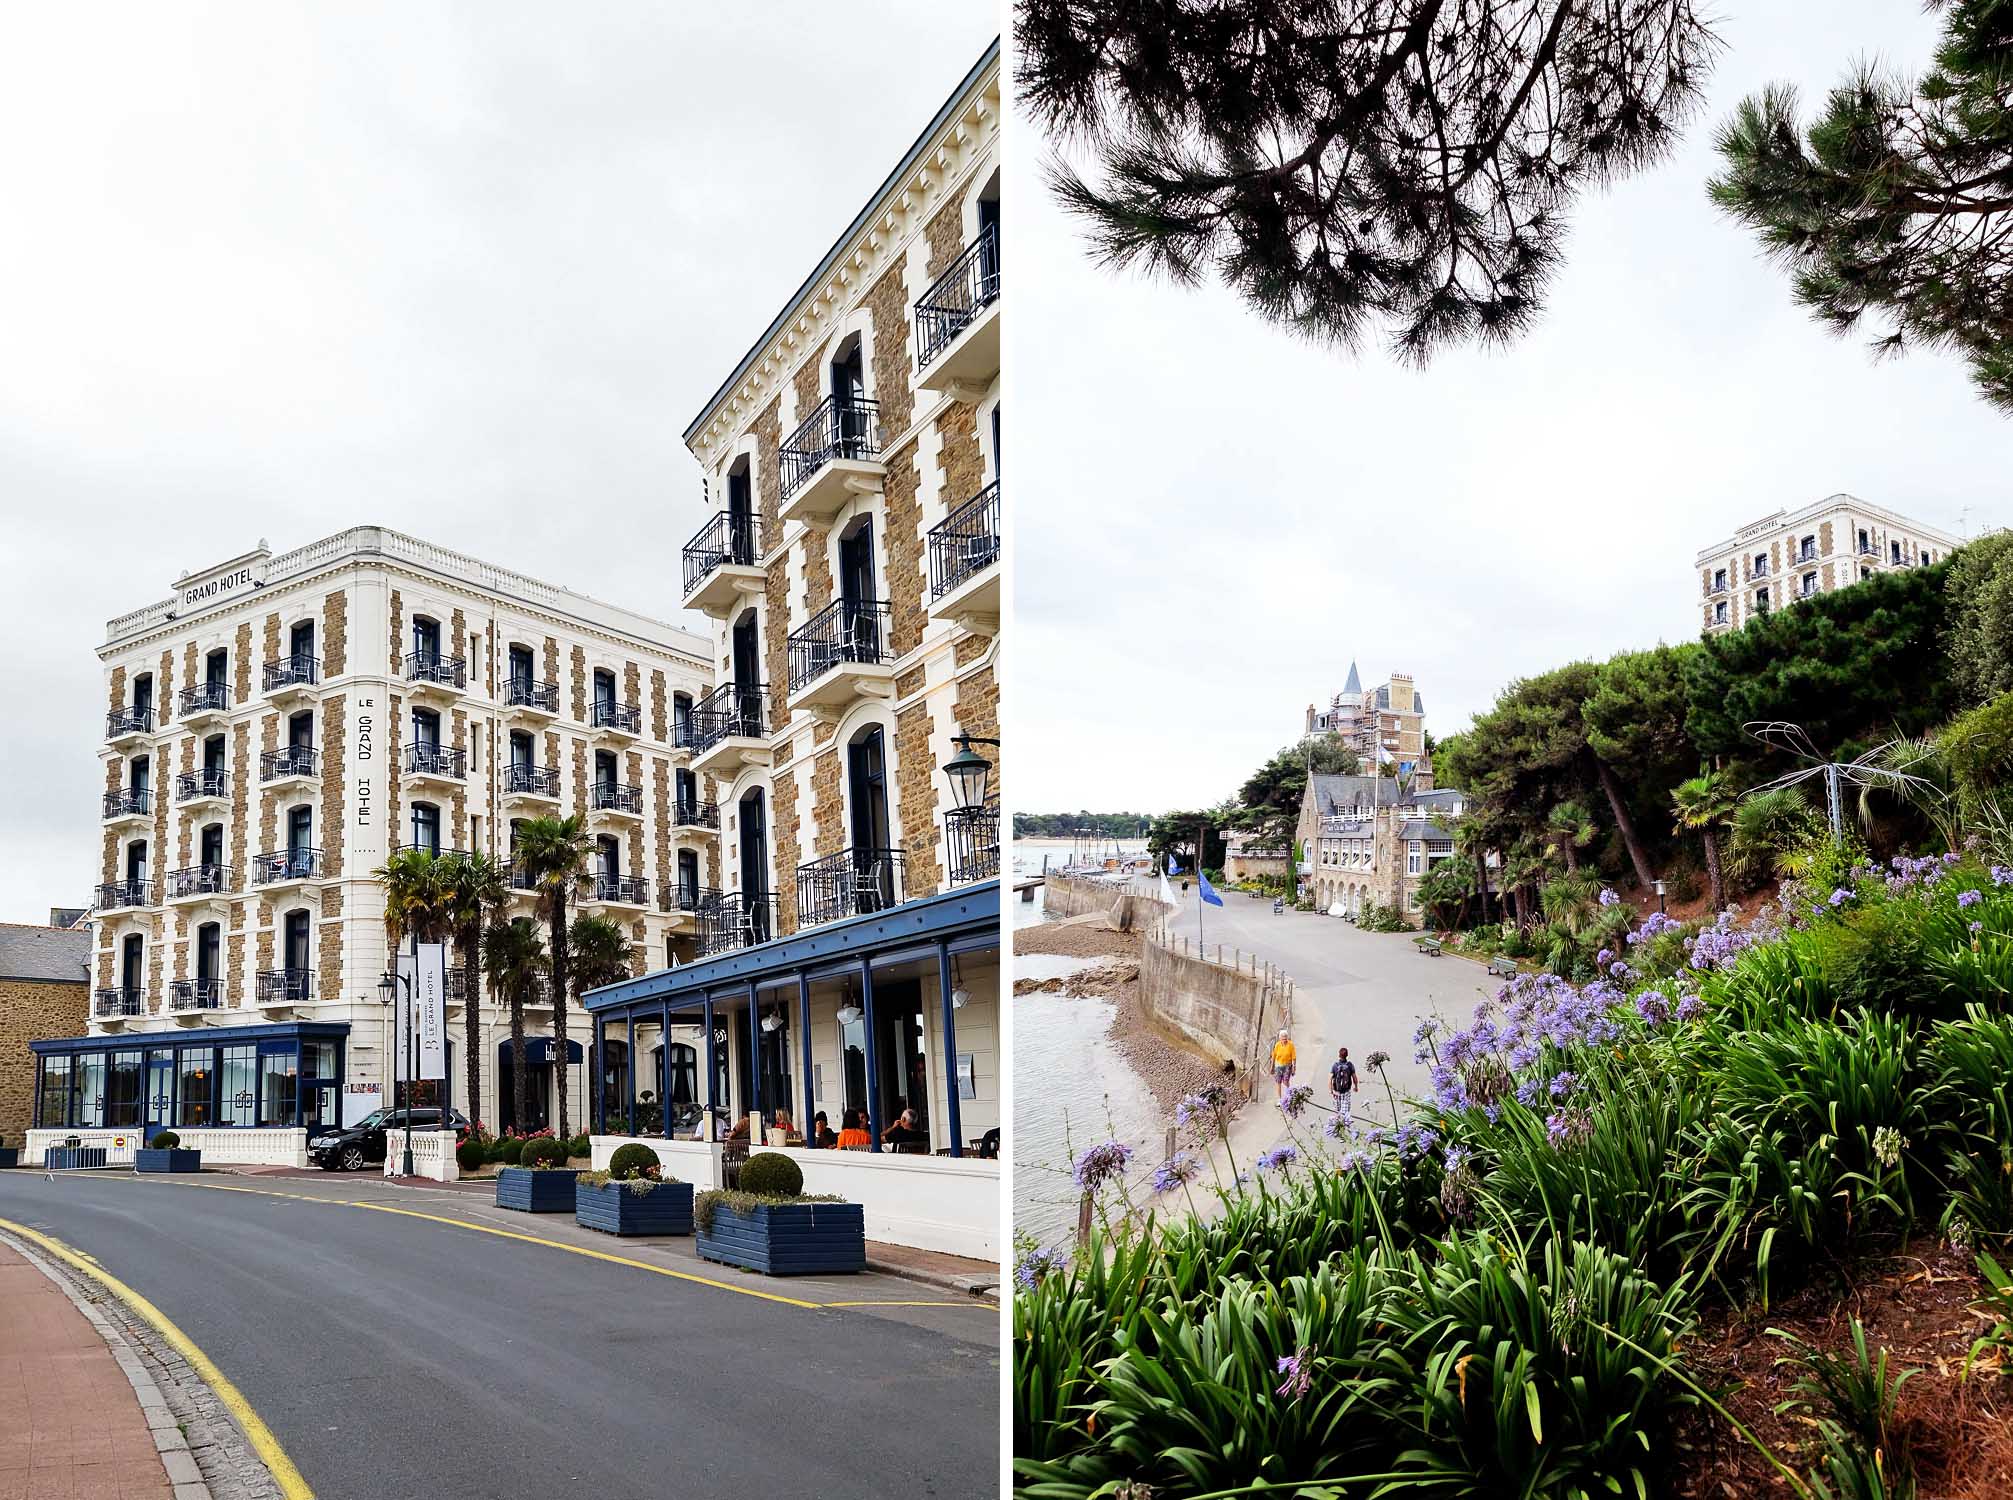 Le Grand Hotel Barriere, Dinard - Brittany, France